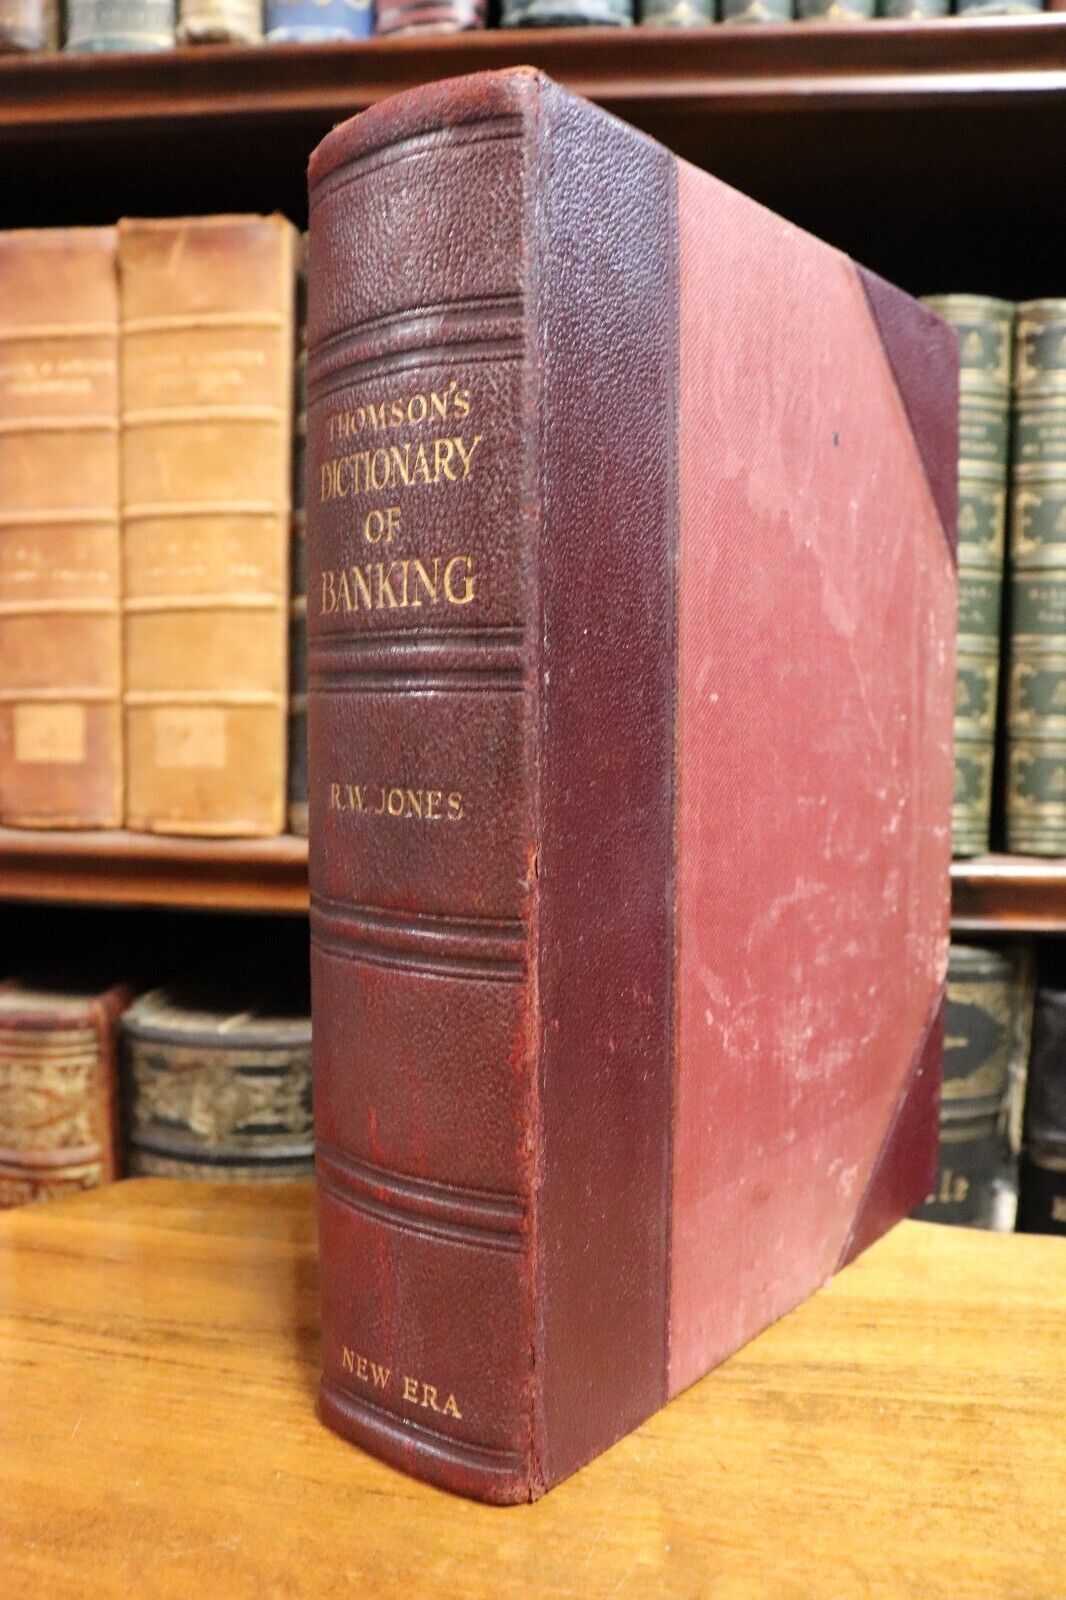 Thomson's Dictionary Of Banking - c1938 - Antique Financial Reference Book